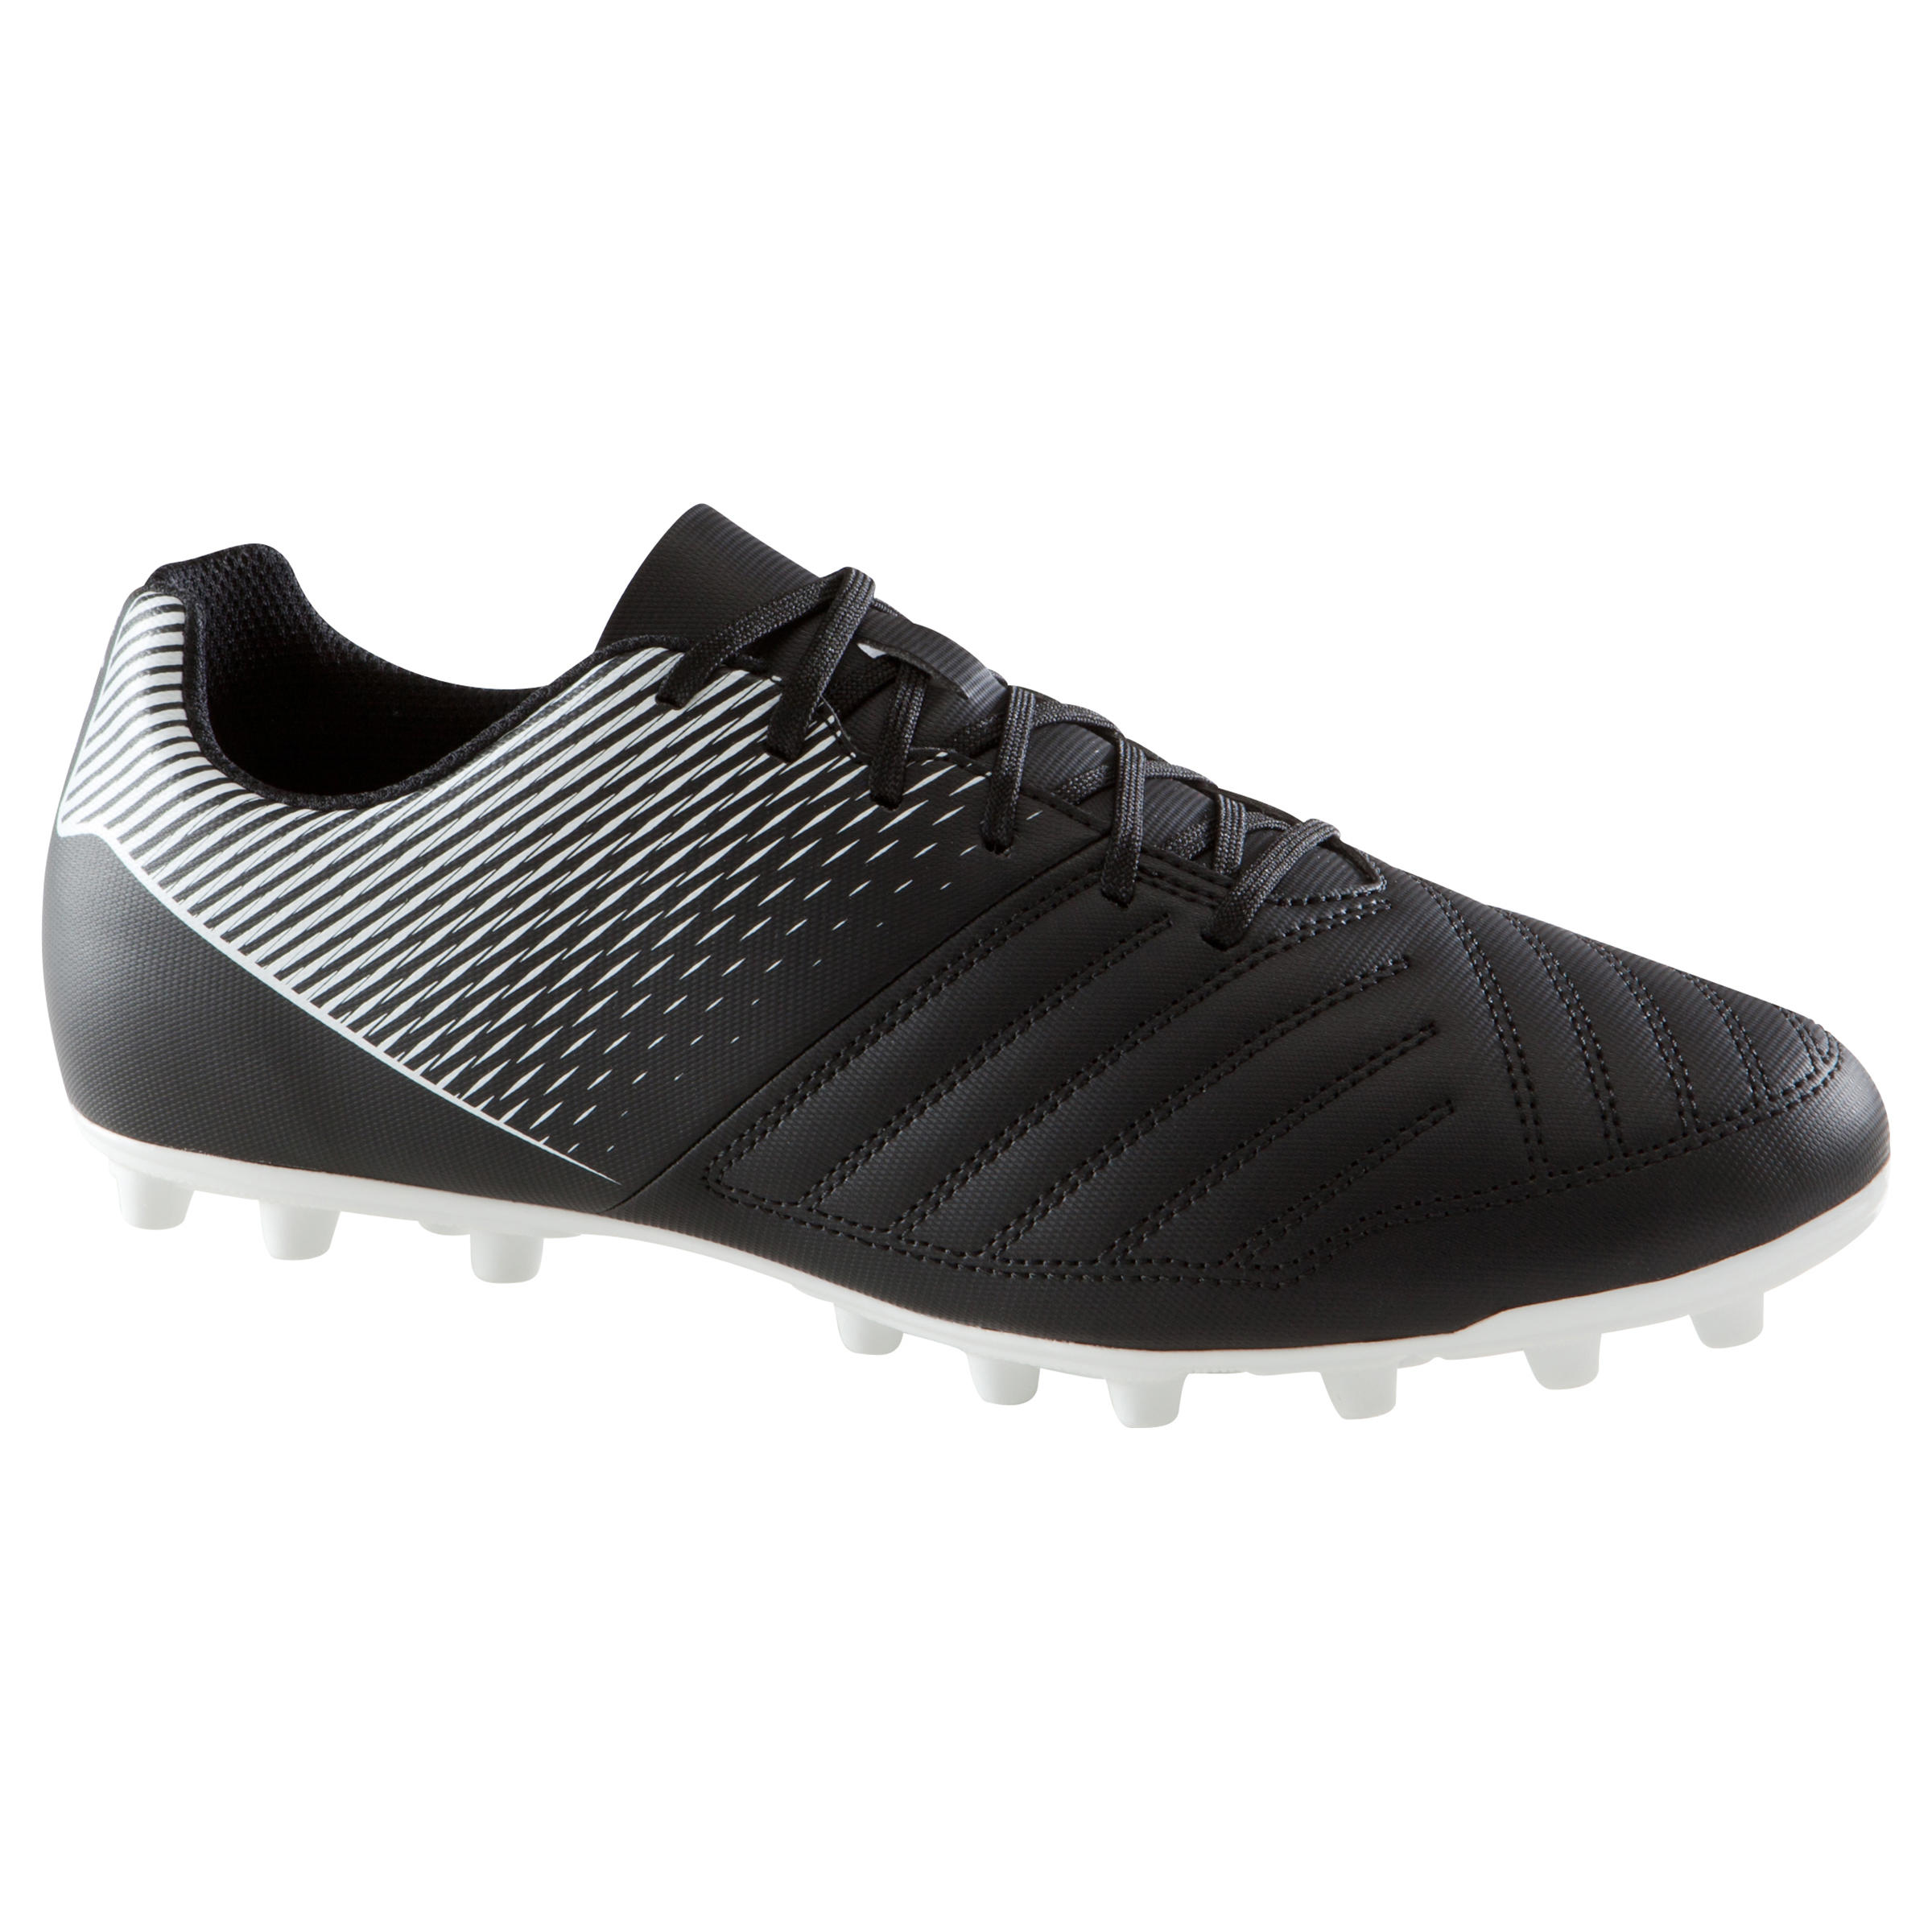 Adult Dry Pitch Football Boots Agility 